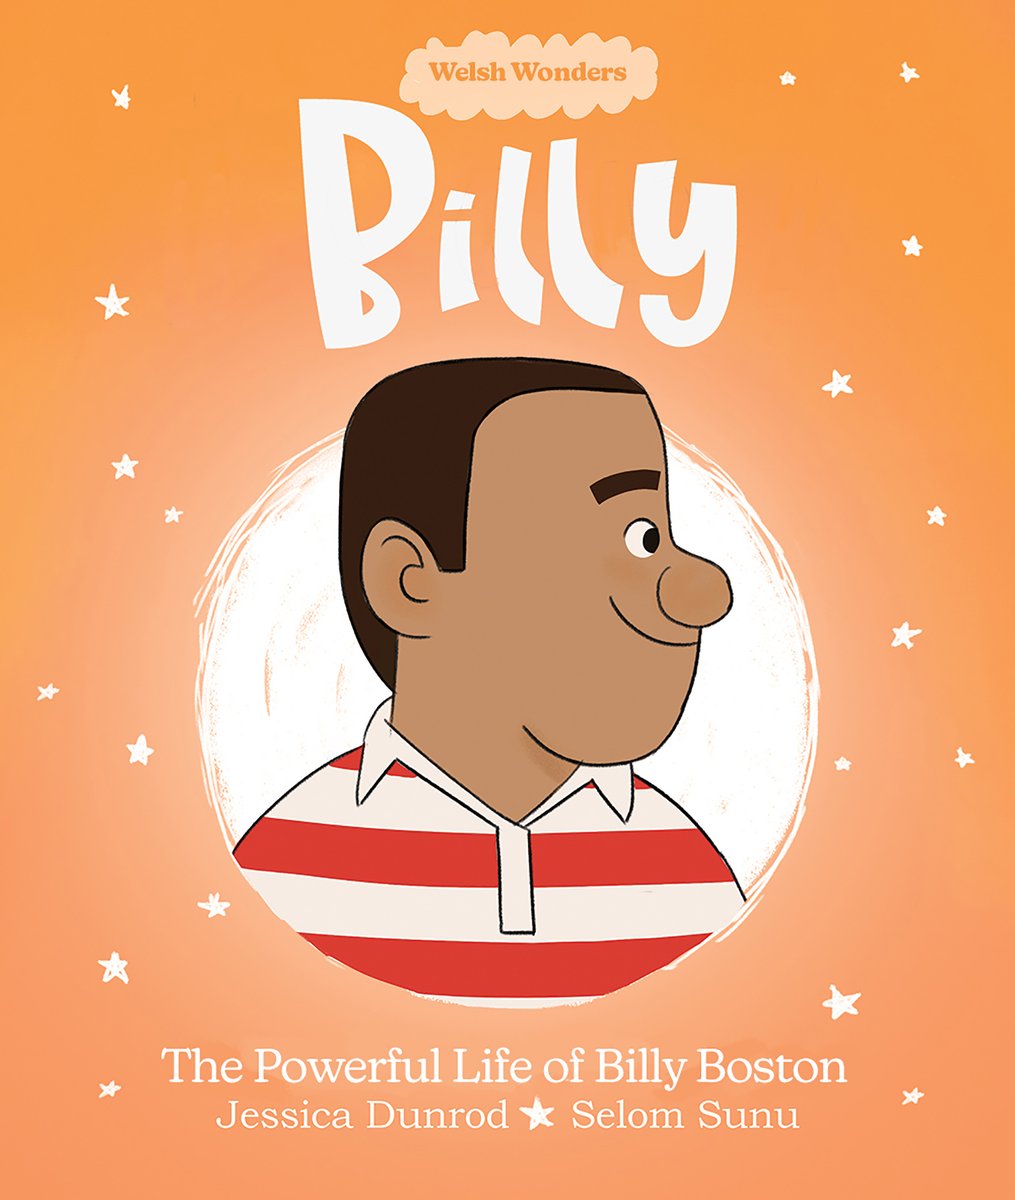 Presenting Billy: The Powerful Life of Billy Boston, by Jessica Dunrod (@JDunrod) and Selom Sunu (@MrSunu) Read the story of one of the greatest rugby league players of all time.

This is no. 10 in our Welsh Wonders series of picturebooks inspiring kids age 3-8. 

Only £5.99!